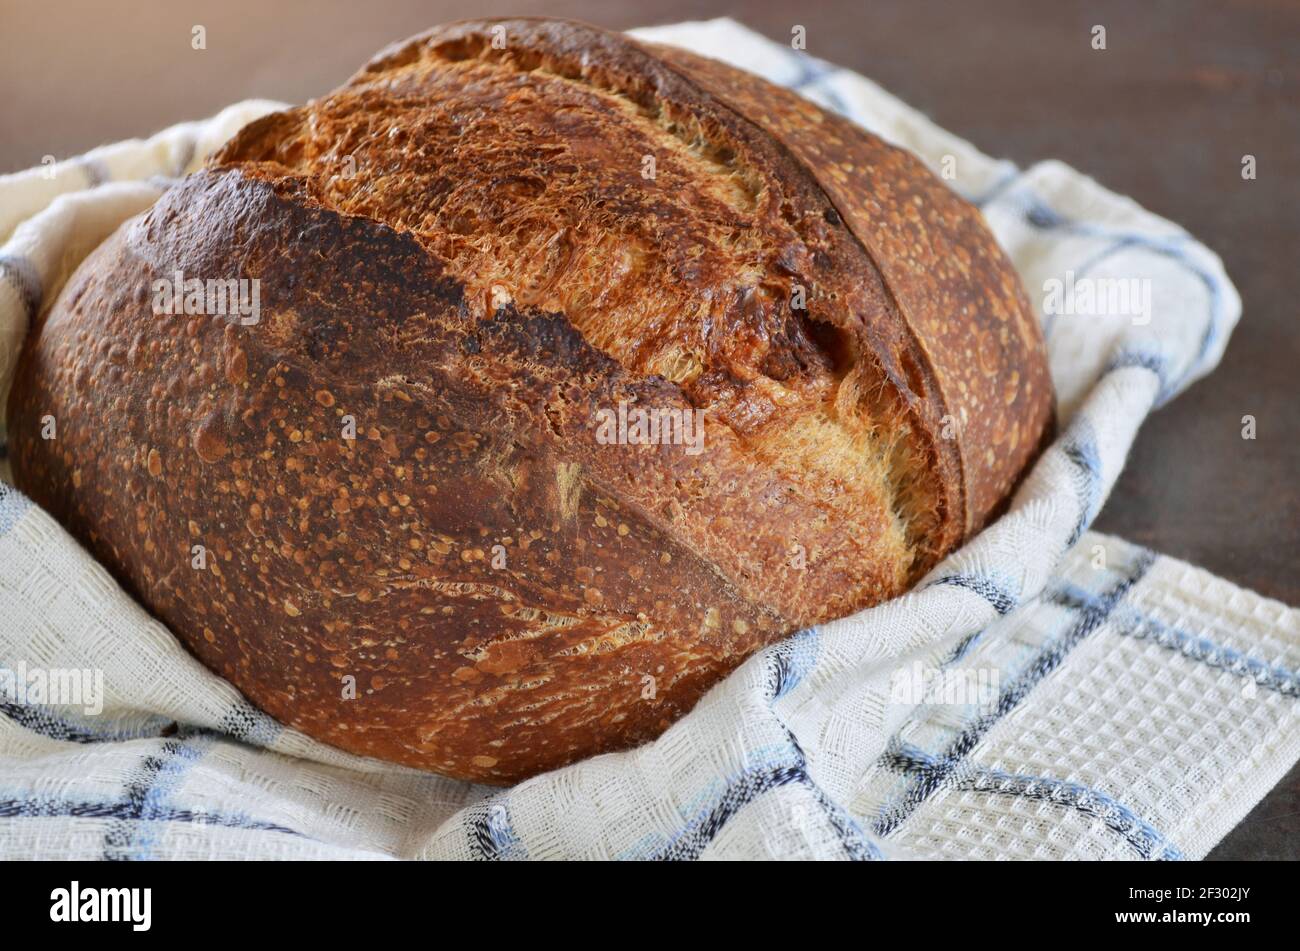 Freshly baked loaf of sourdough bread on a kitchen towel close-up Stock Photo